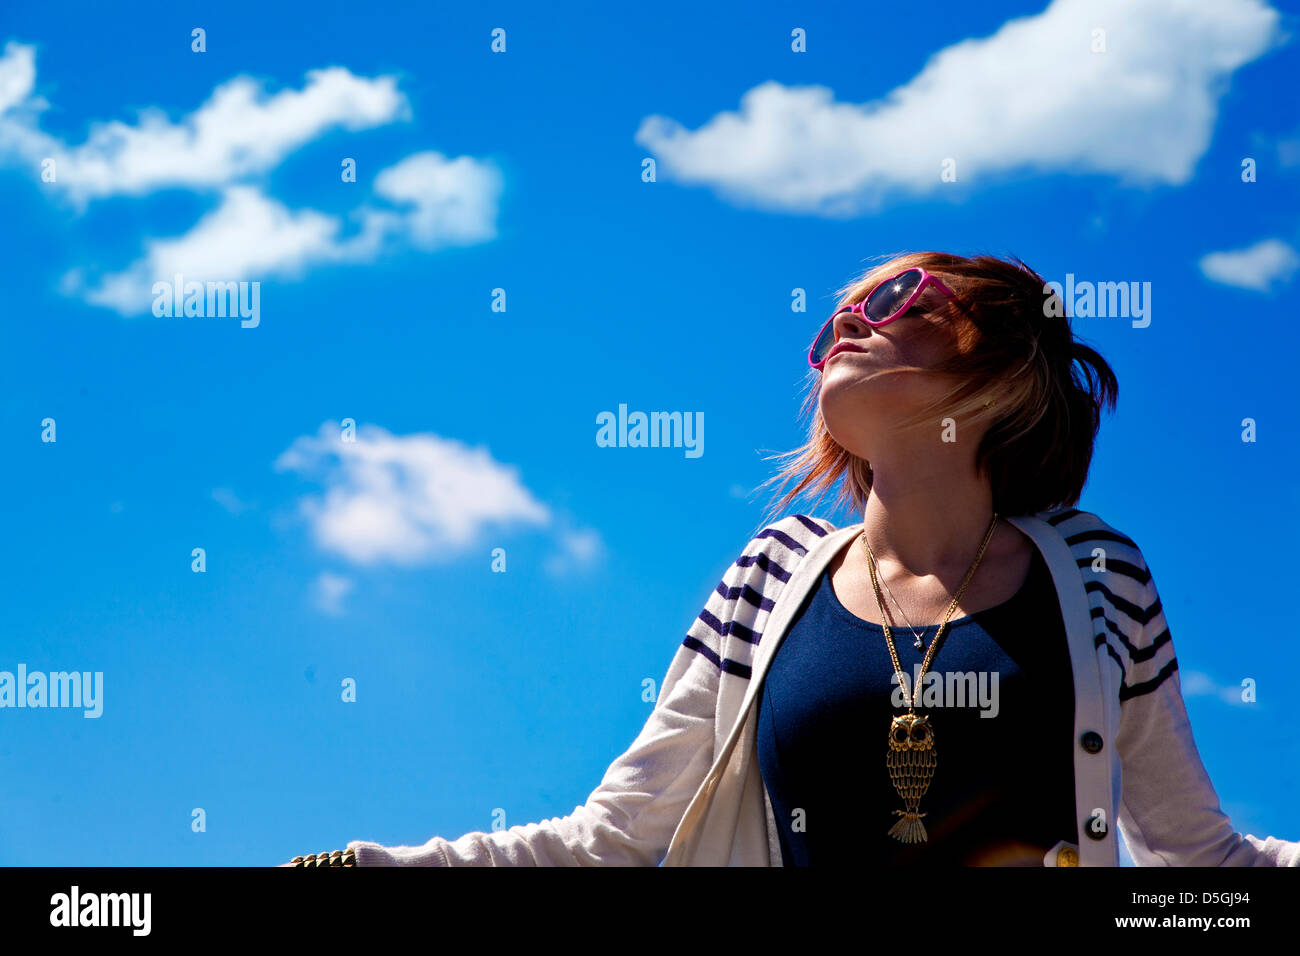 Woman white sweater blue dress against blue sky Stock Photo